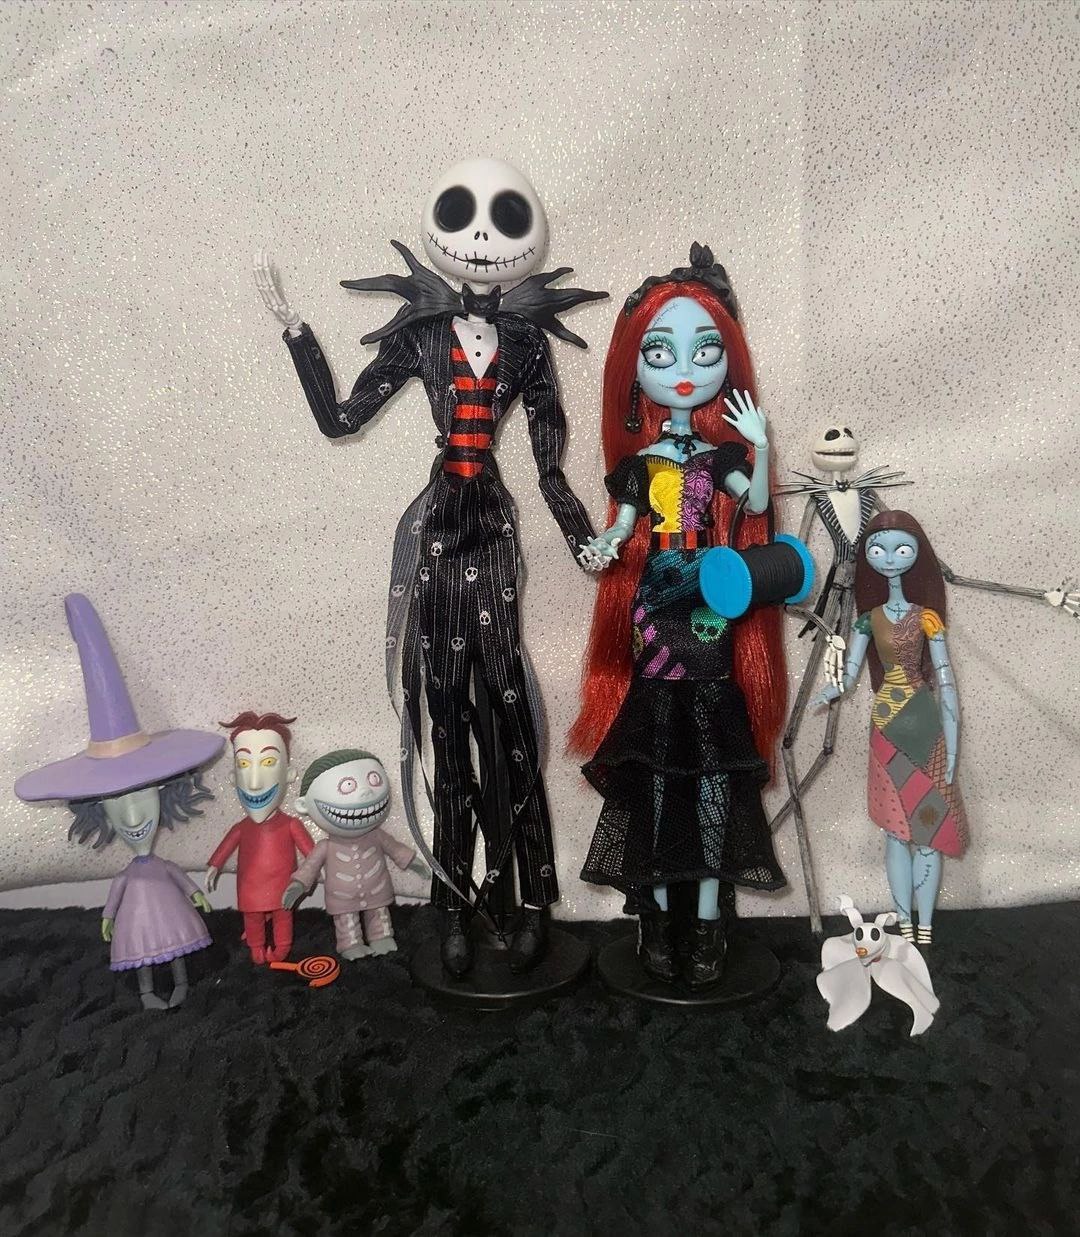 Announcing Monster High Nightmare Before Christmas Jack & Sally Dolls